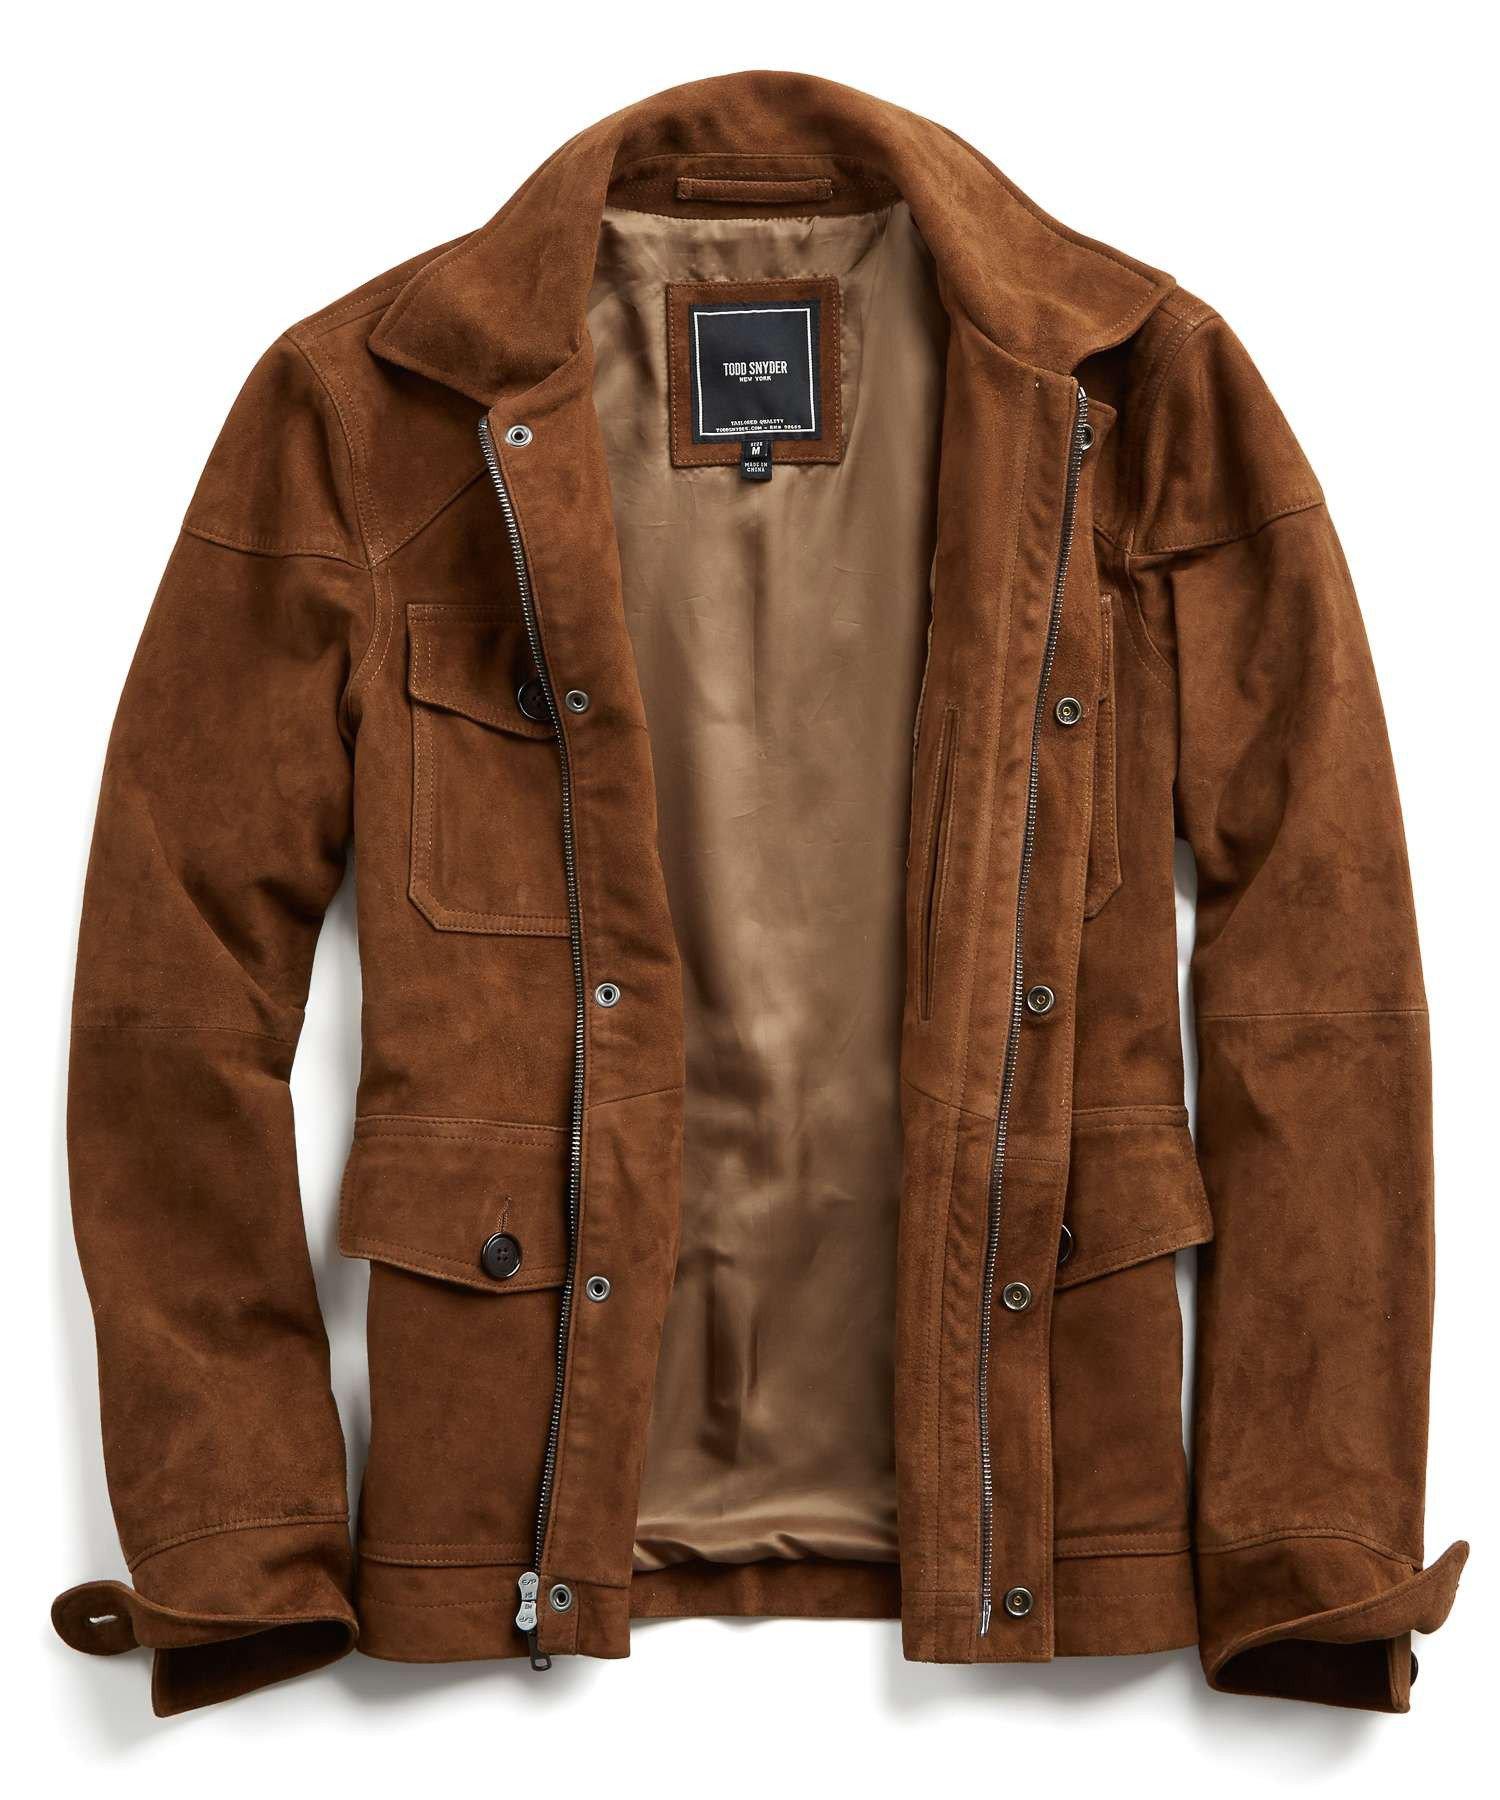 Lyst - Todd Snyder Suede Quad Jacket In Tobacco in Brown for Men